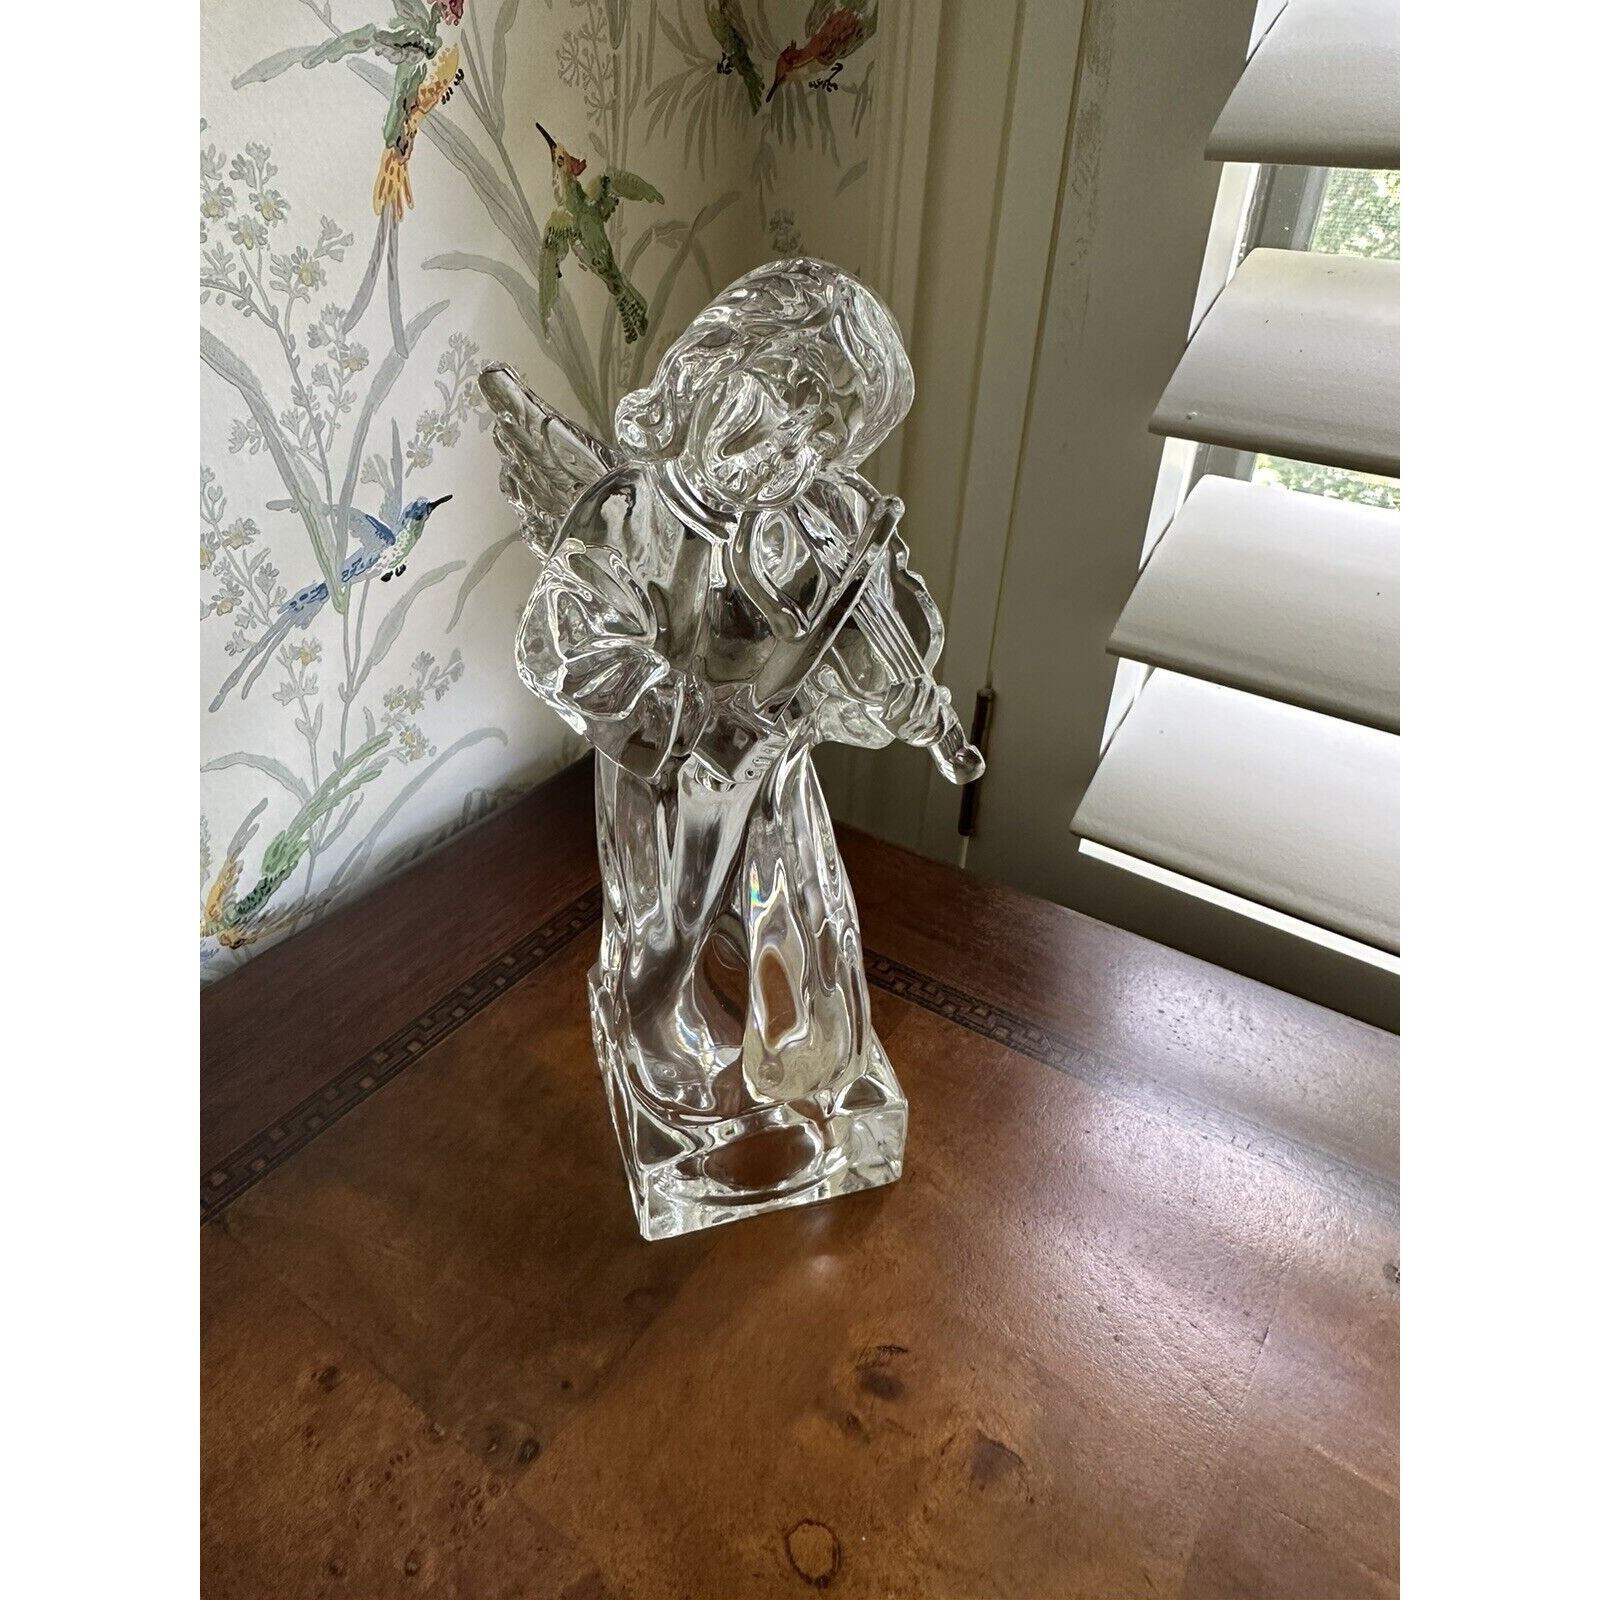 Vintage MIKASA Lead Crystal Angel Playing Violin - Herald Collection - Germany